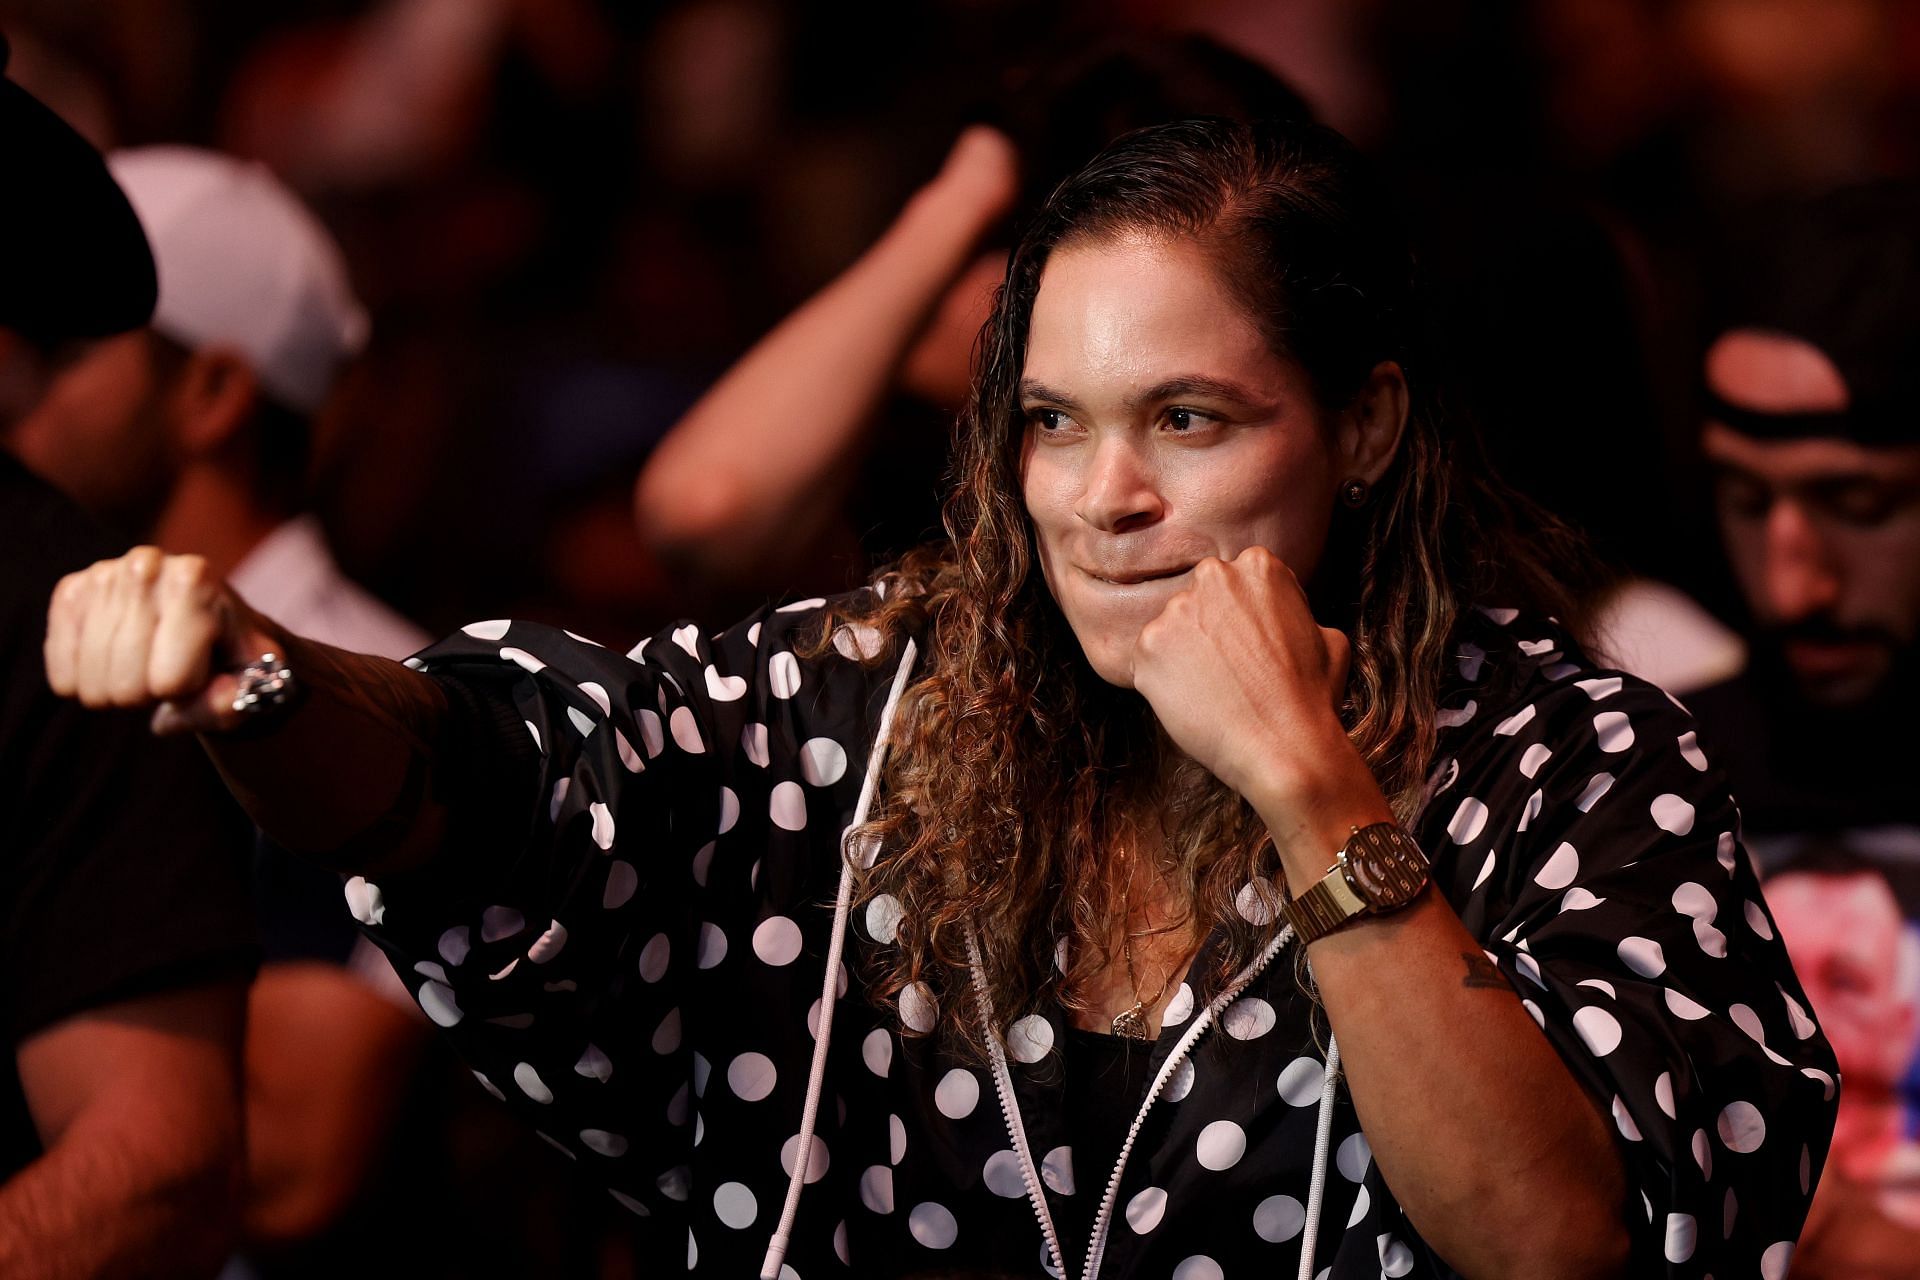 At the age of 35, Amanda Nunes may be slowing down somewhat